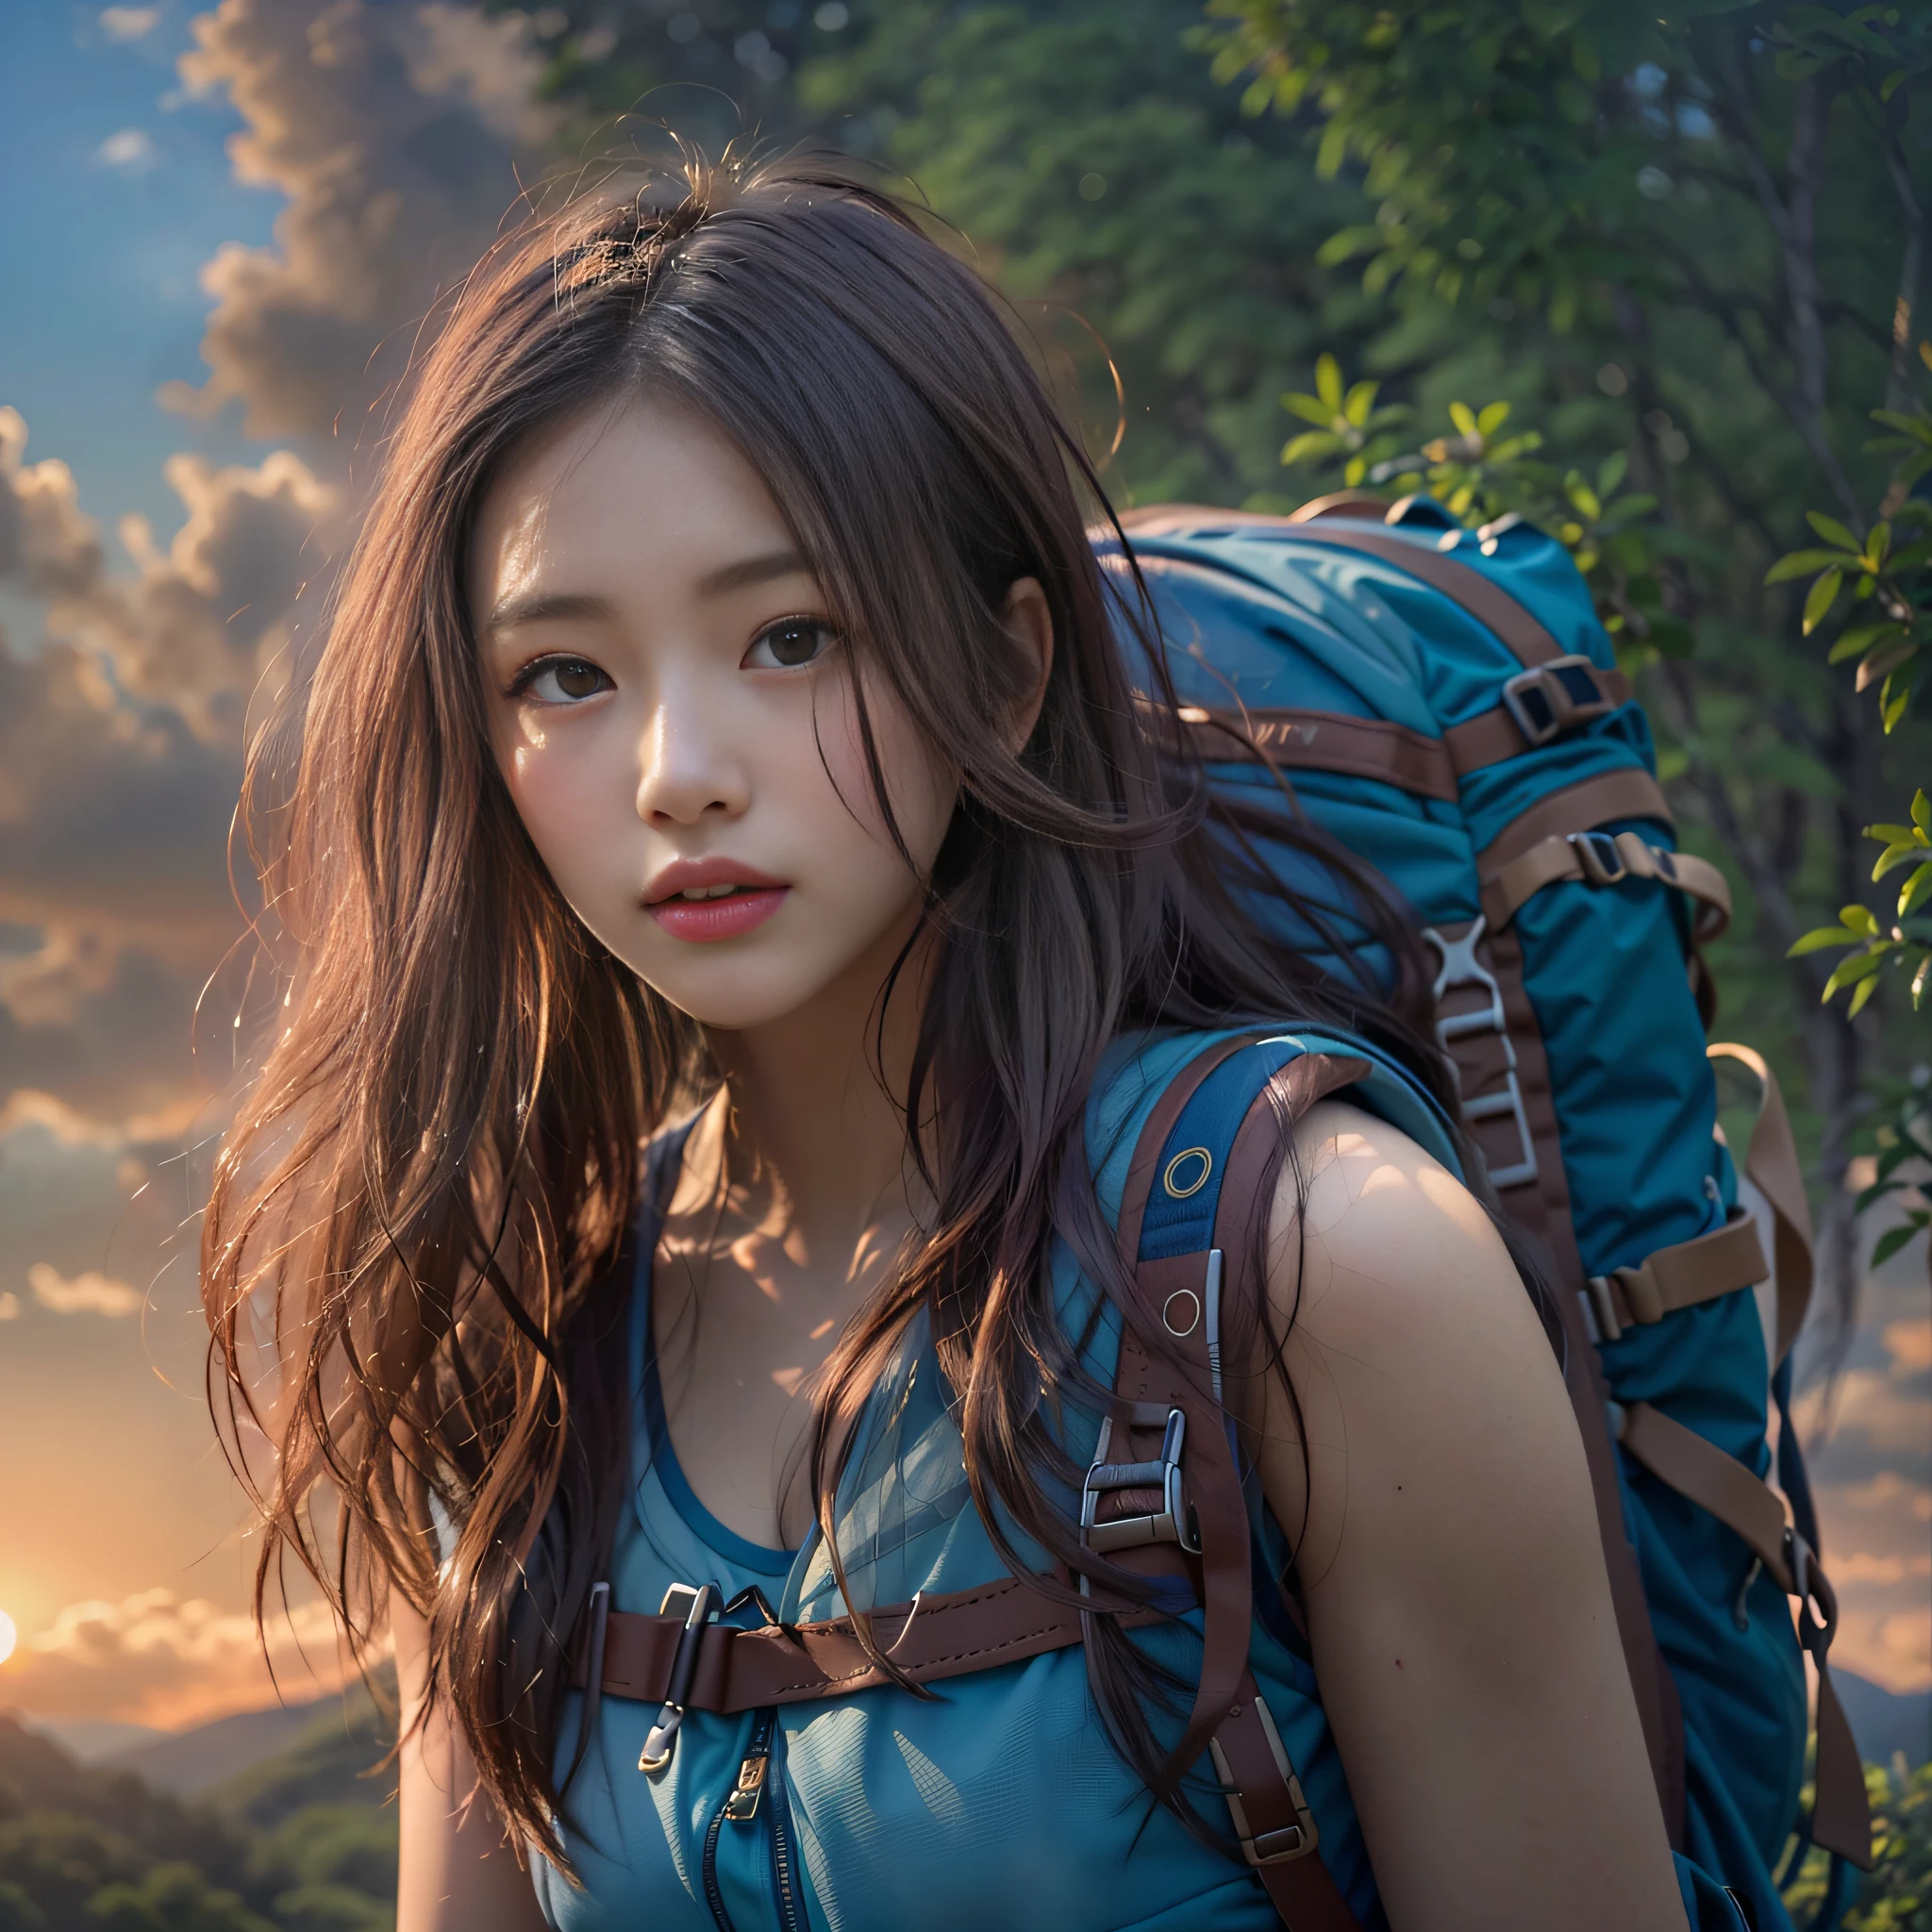 (Naturescape photography), (best quality), masterpiece:1.2, ultra high res, photorealistic:1.4, RAW photo, (Magnificent mountain, sea of clouds), (On a very high mountain peak), (sunset), (wideangle shot),  (Show cleavage:0.8),
(1girl), (Photo from the knee up:1.3), (18 years old), (happy:1.2), (shiny skin), (real skin), (semi-long hair, dark brown hair)
(Sleeveless tank top), (blue Trekking shorts), (Carrying a large backpack), 
(ultra detailed face), (ultra Beautiful fece), (ultra detailed eyes), (ultra detailed nose), (ultra detailed mouth), (ultra detailed arms), (ultra detailed body), pan focus, looking at the audience